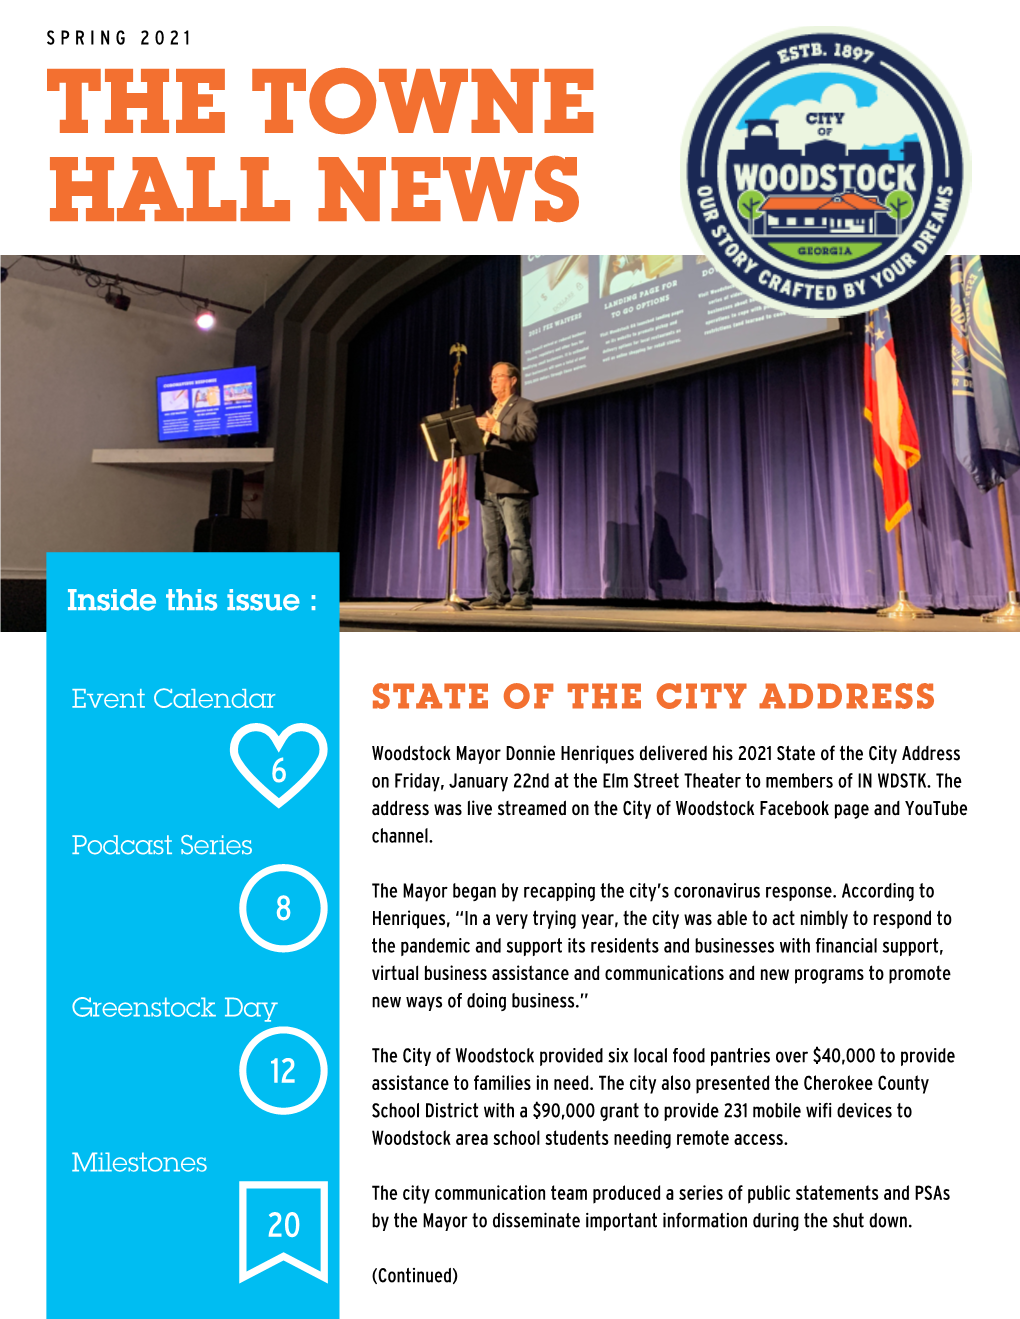 The Towne Hall News